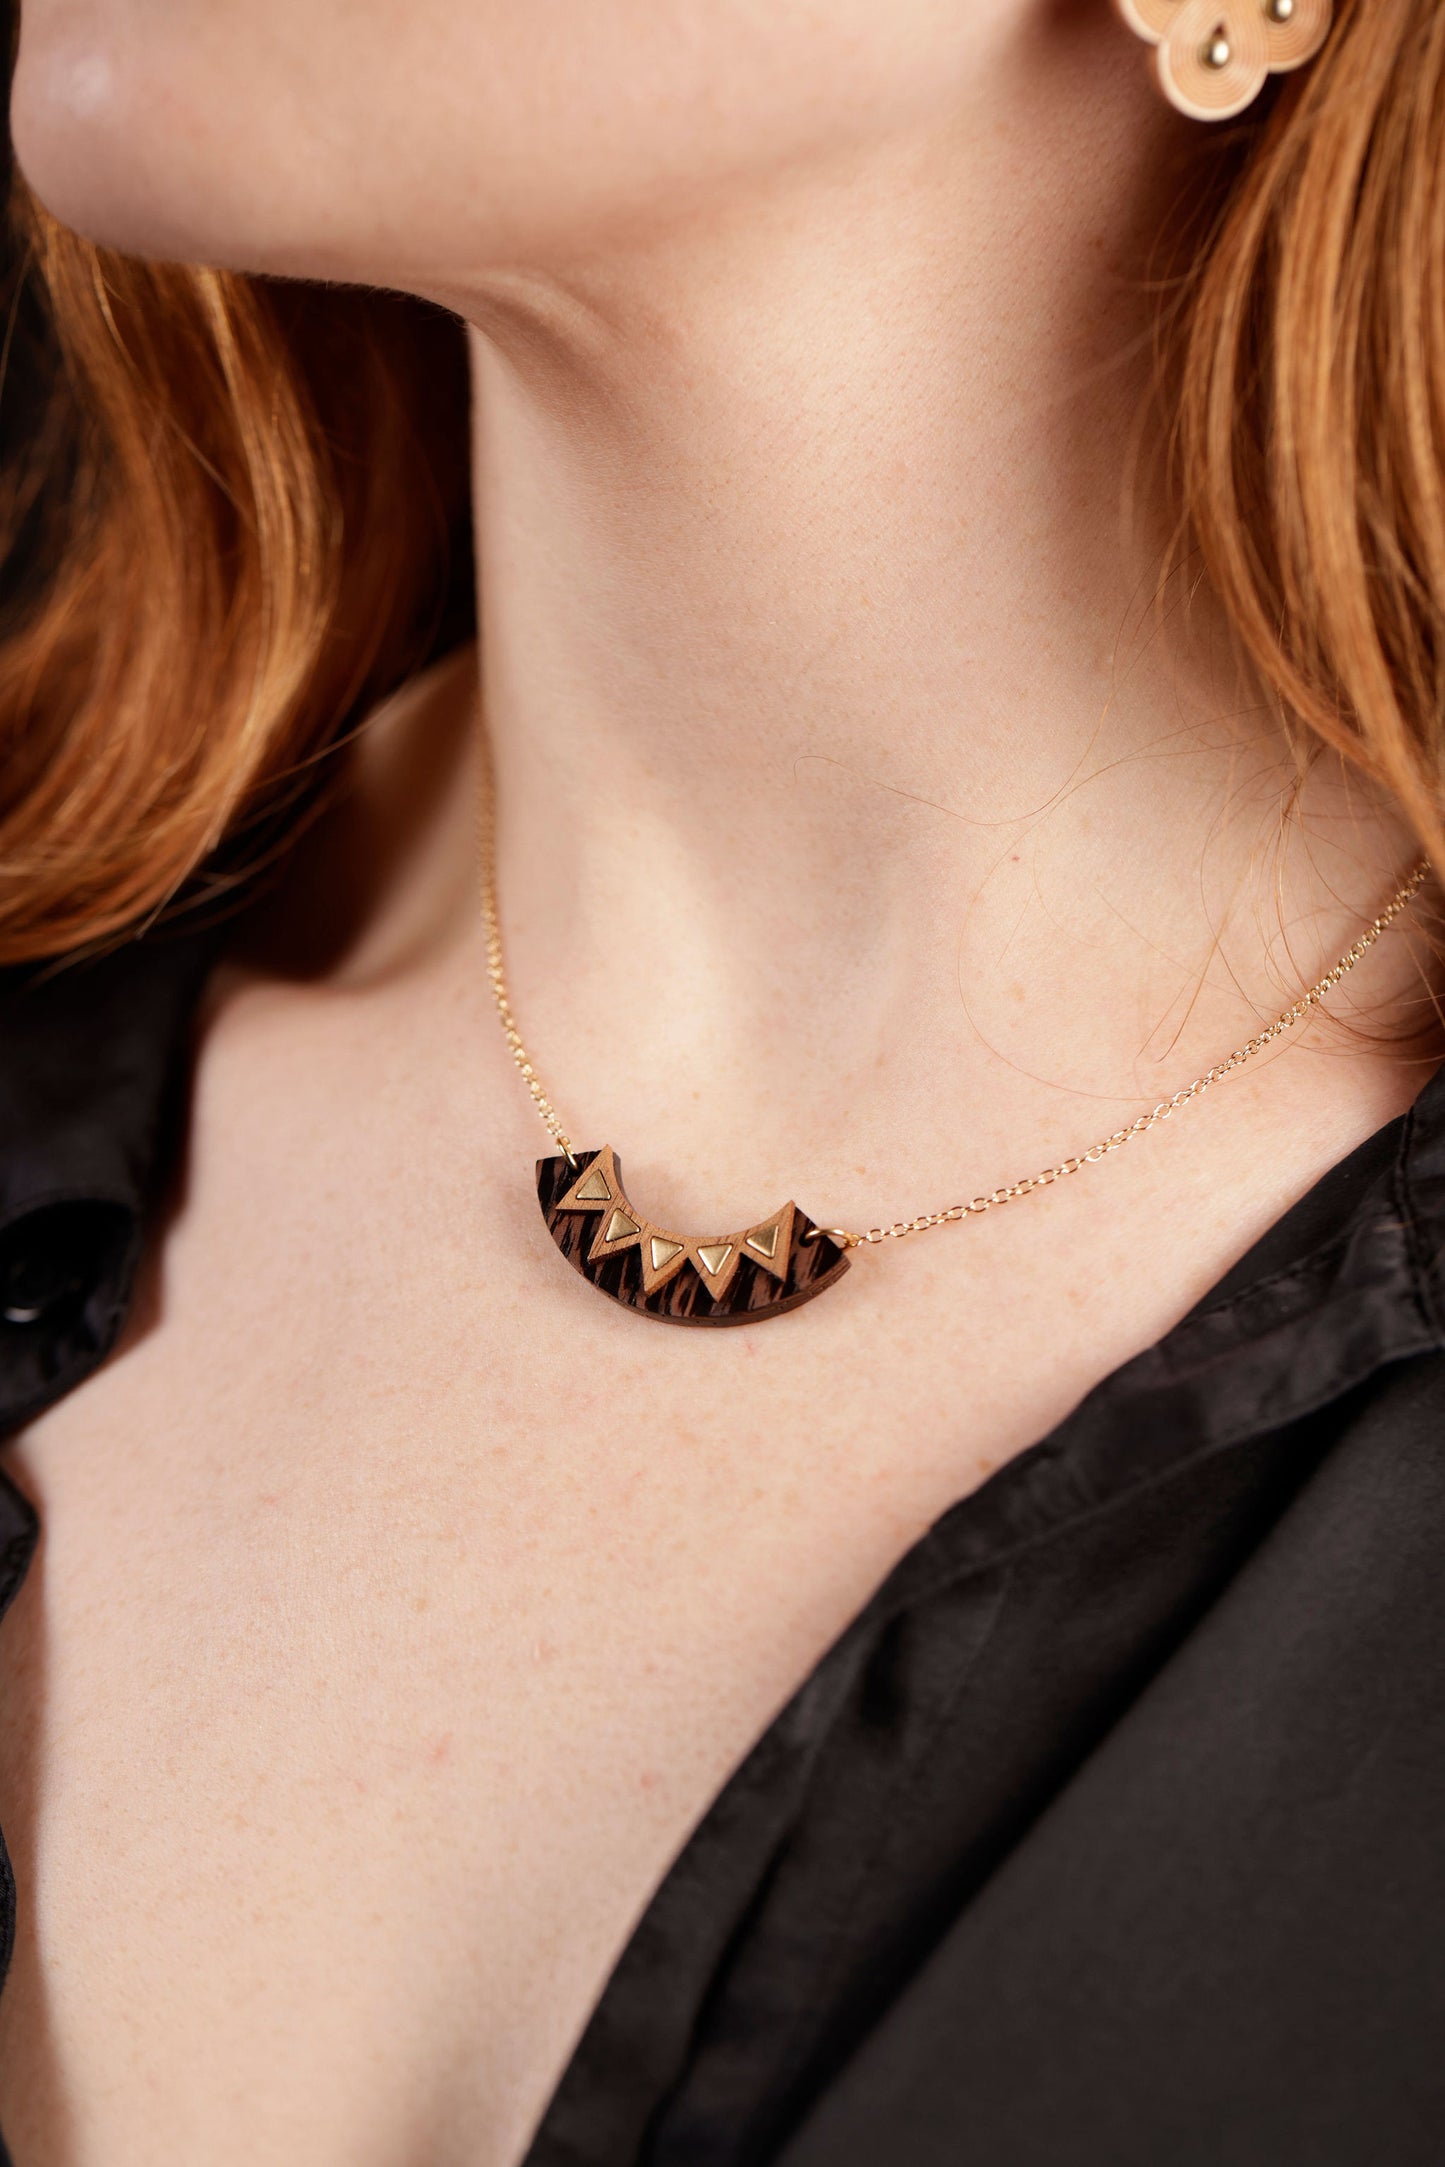 wooden arc necklace on model